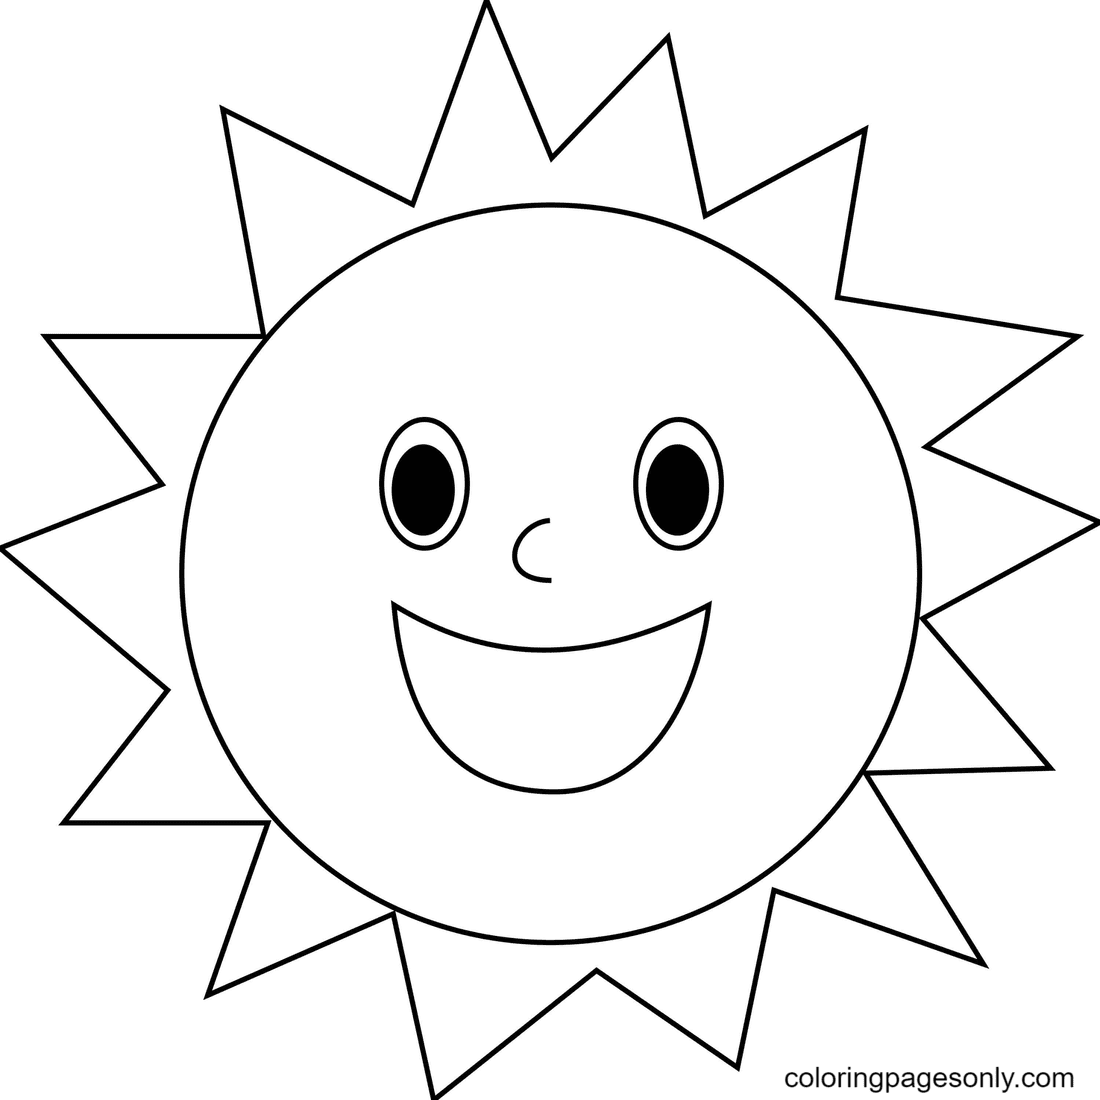 The Sun is Smiling Coloring Pages